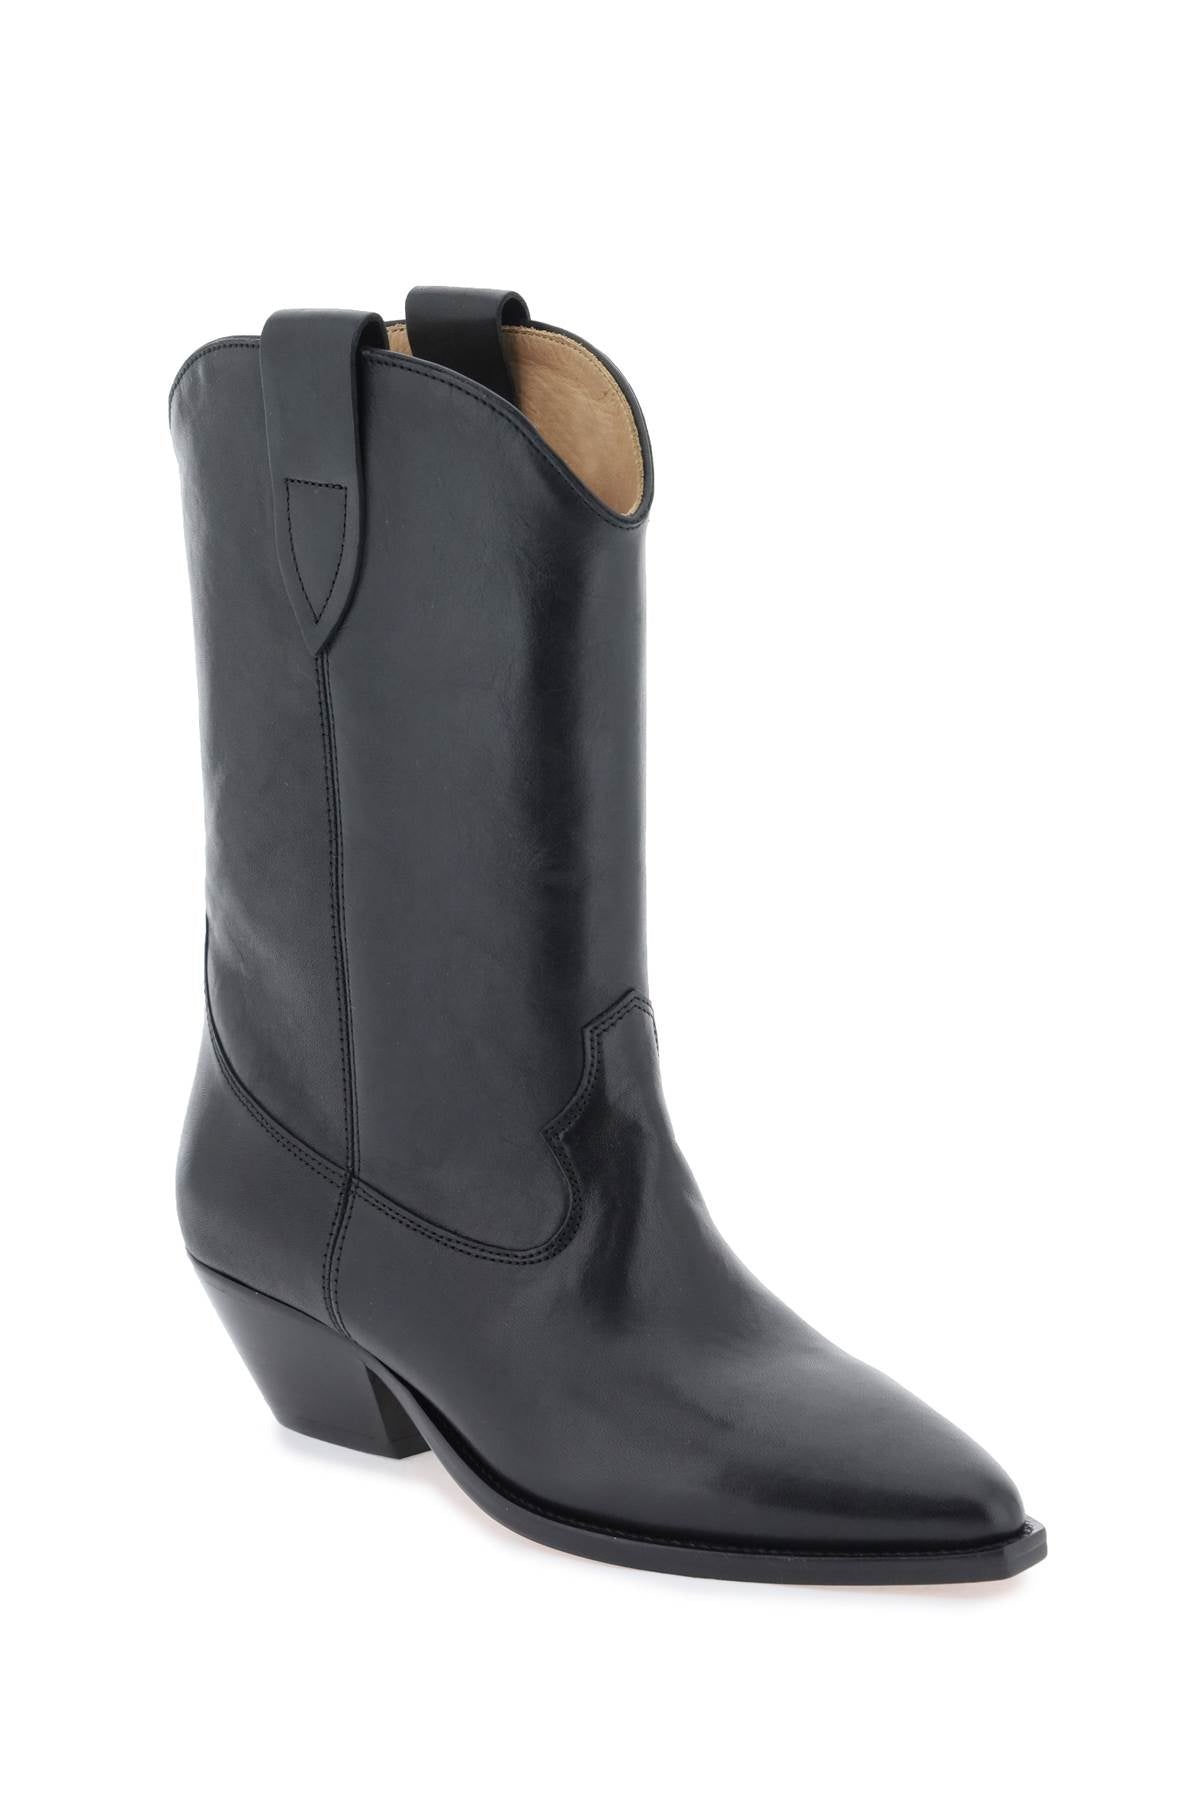 Duerto Texan Ankle Boots - 4